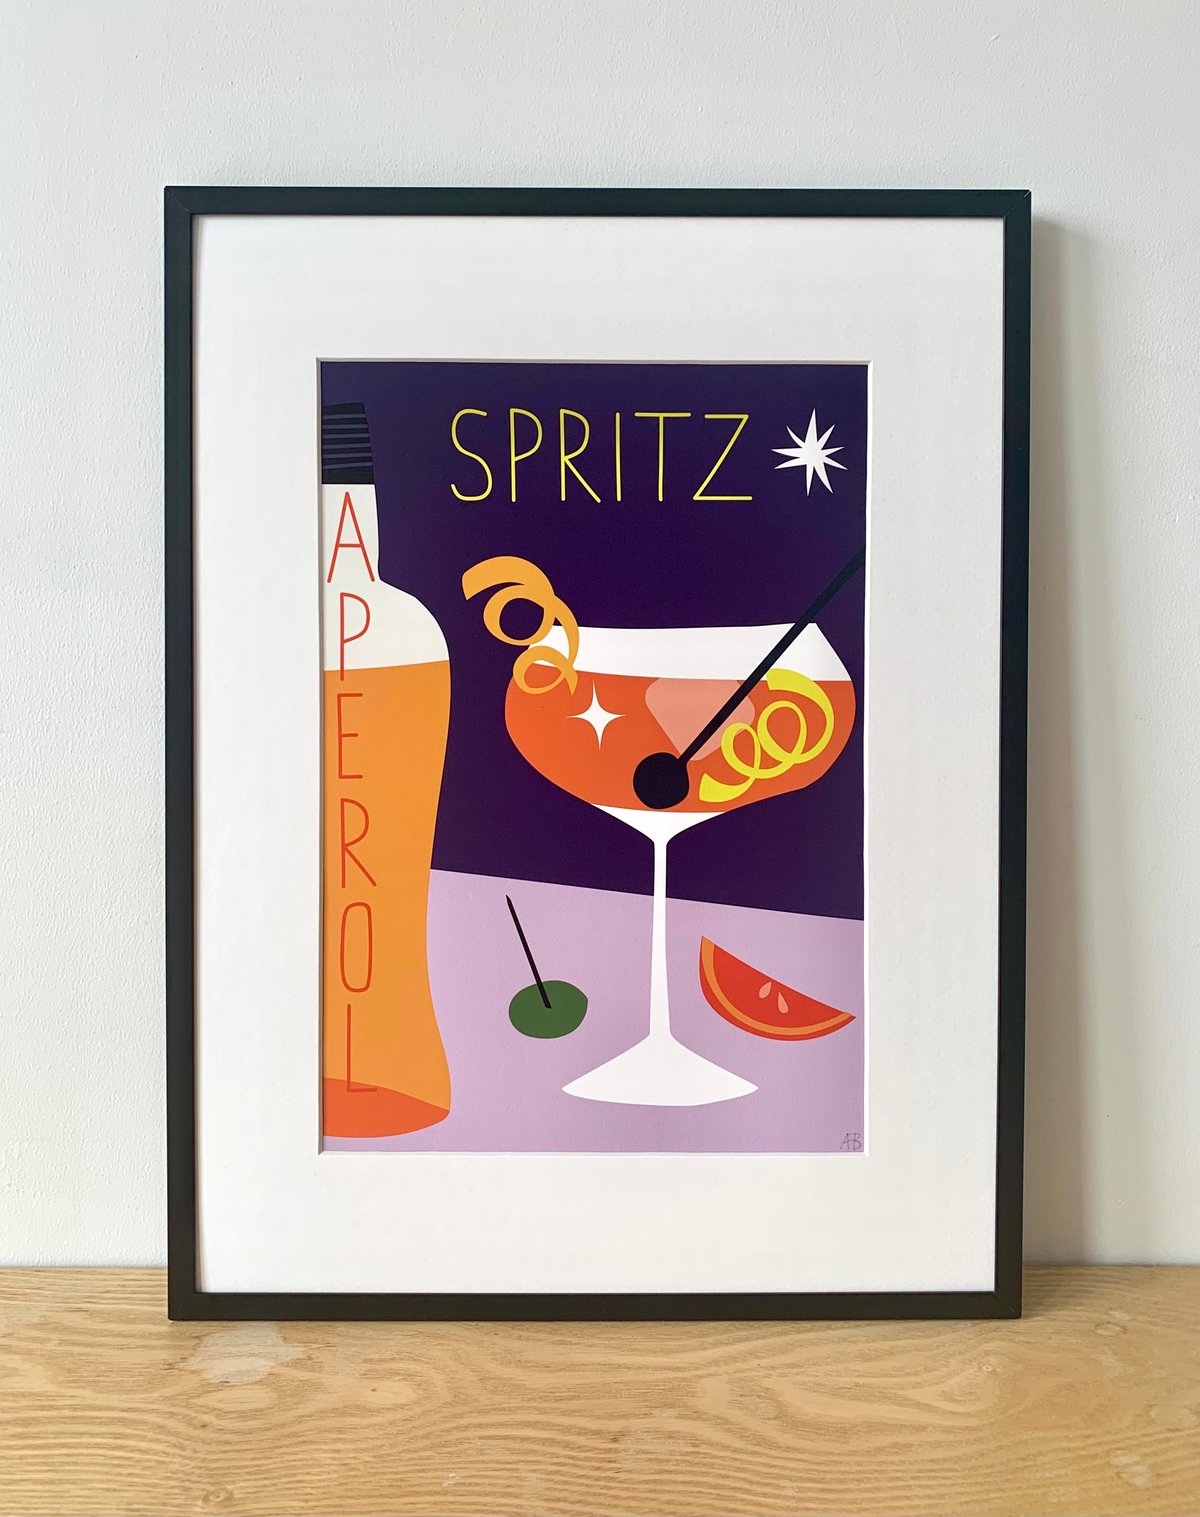 Cocktail Prints A4 - Margarita, Negroni, G&T, Aperol Spritz and Bloody Mary